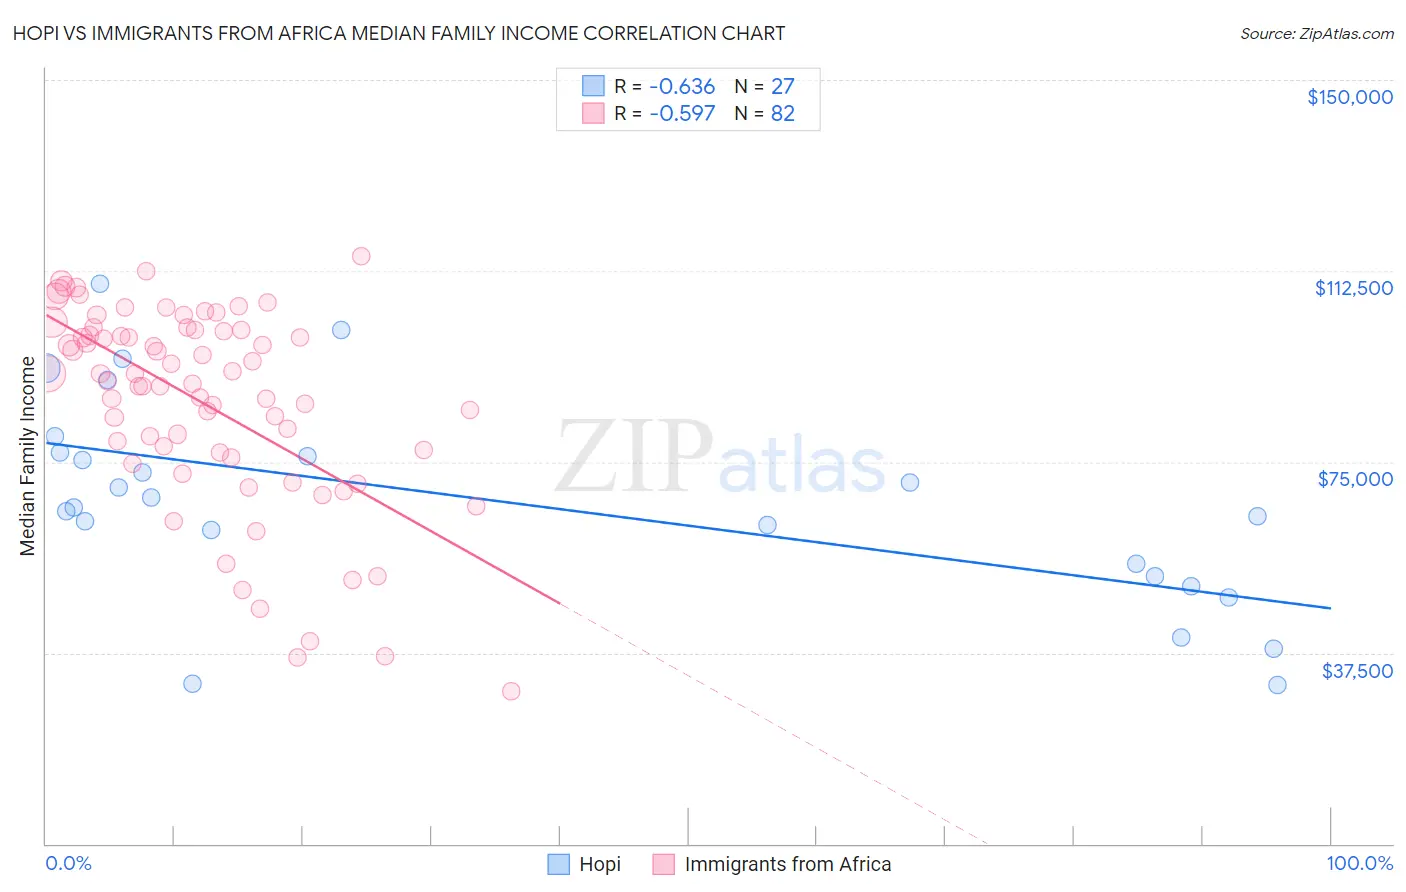 Hopi vs Immigrants from Africa Median Family Income